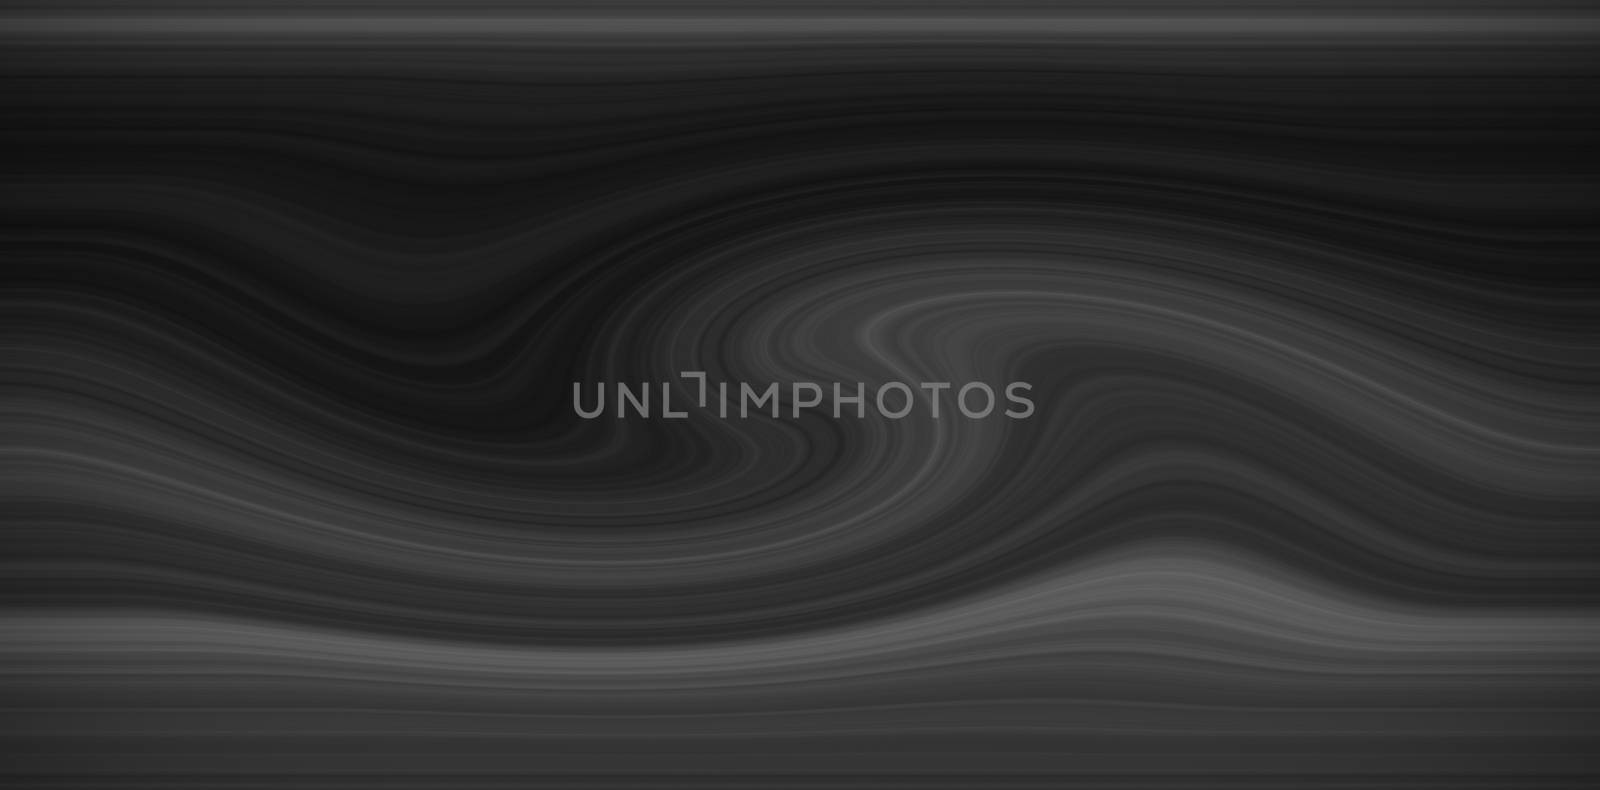 beautiful illustration of colored abstract background used for website, black and white